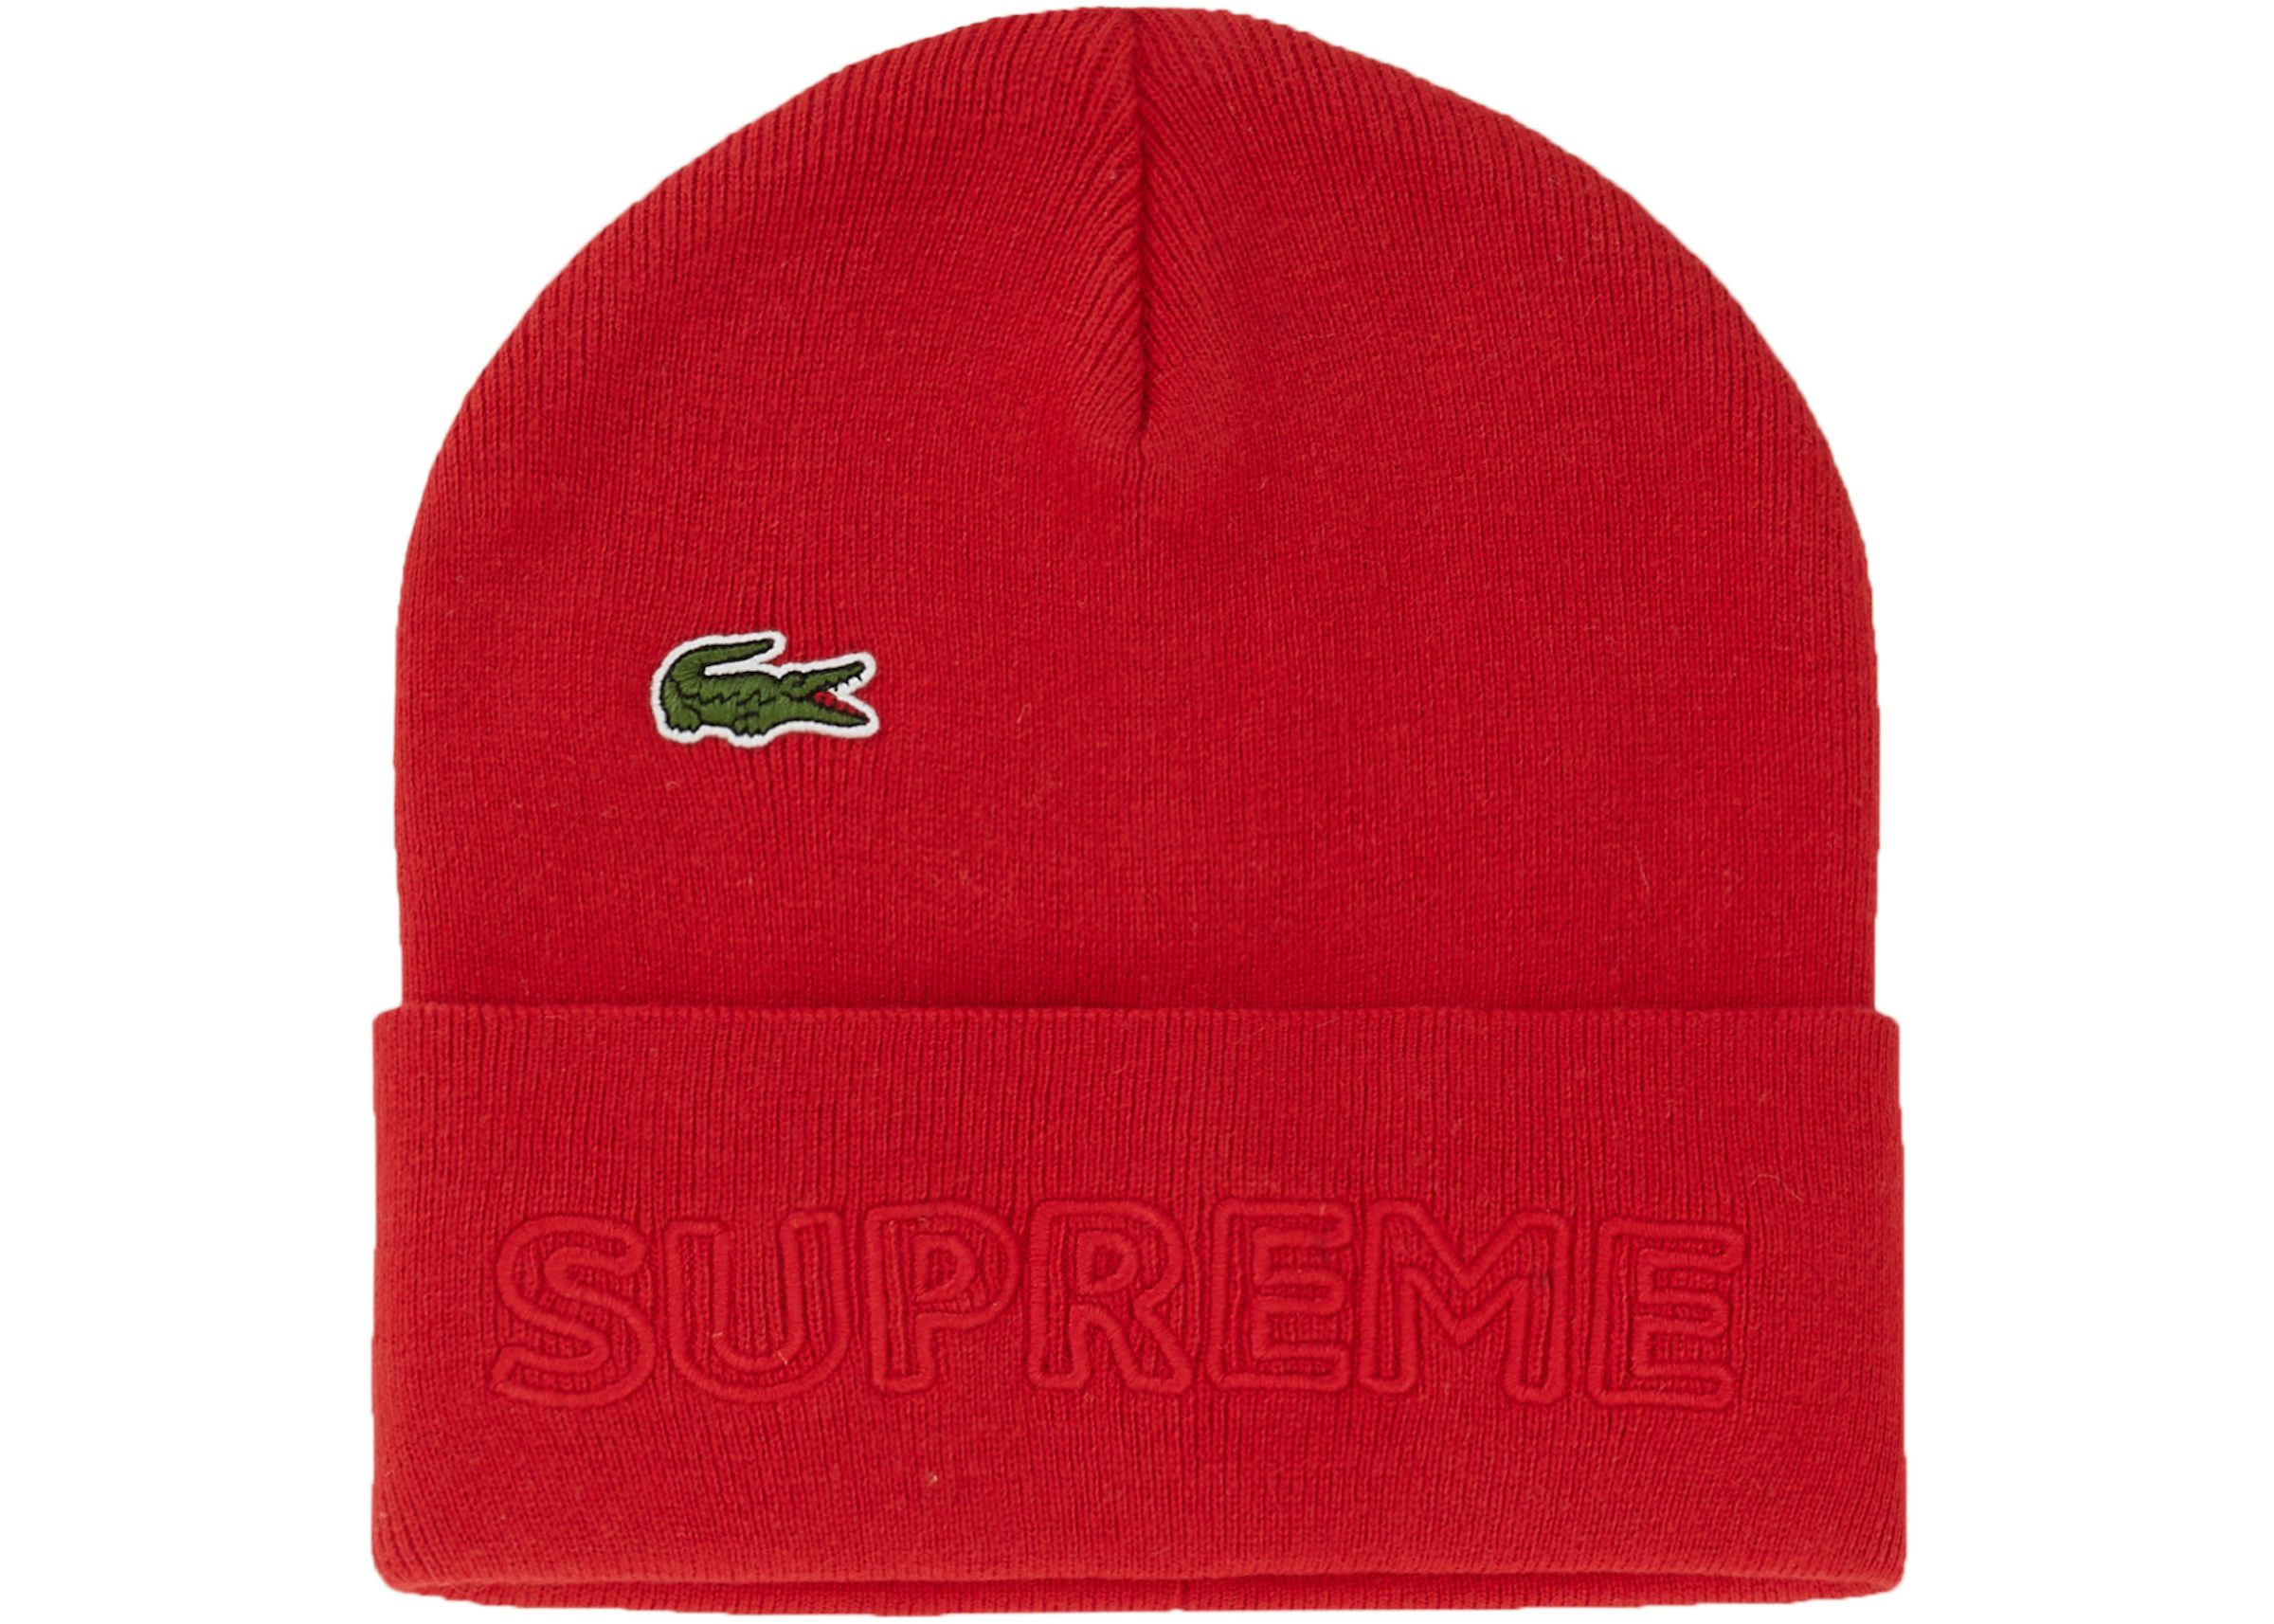 Supreme LACOSTE Beanie Red - FW19 - US